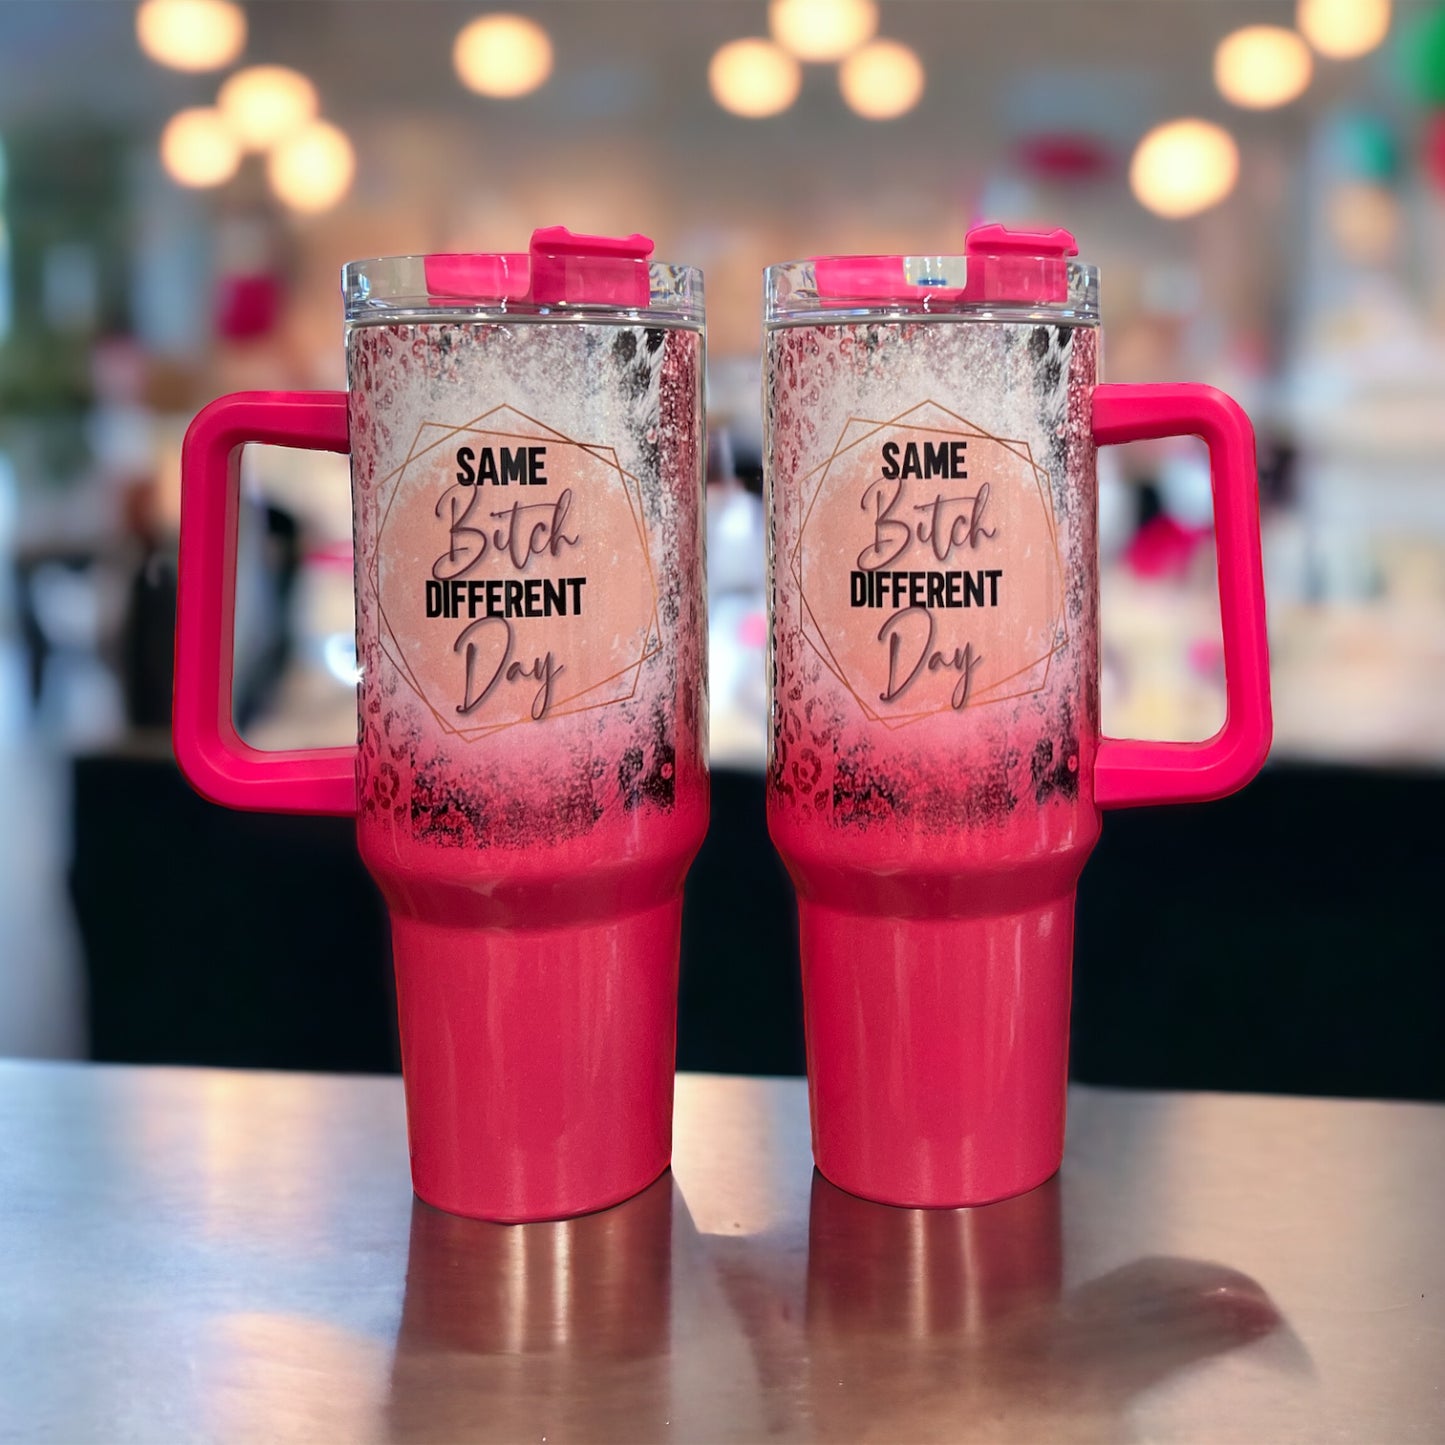 40oz Stanley Style Thirst Quencher Tumblers -Same Bitch Different Day, pink/white, holographic sparkle